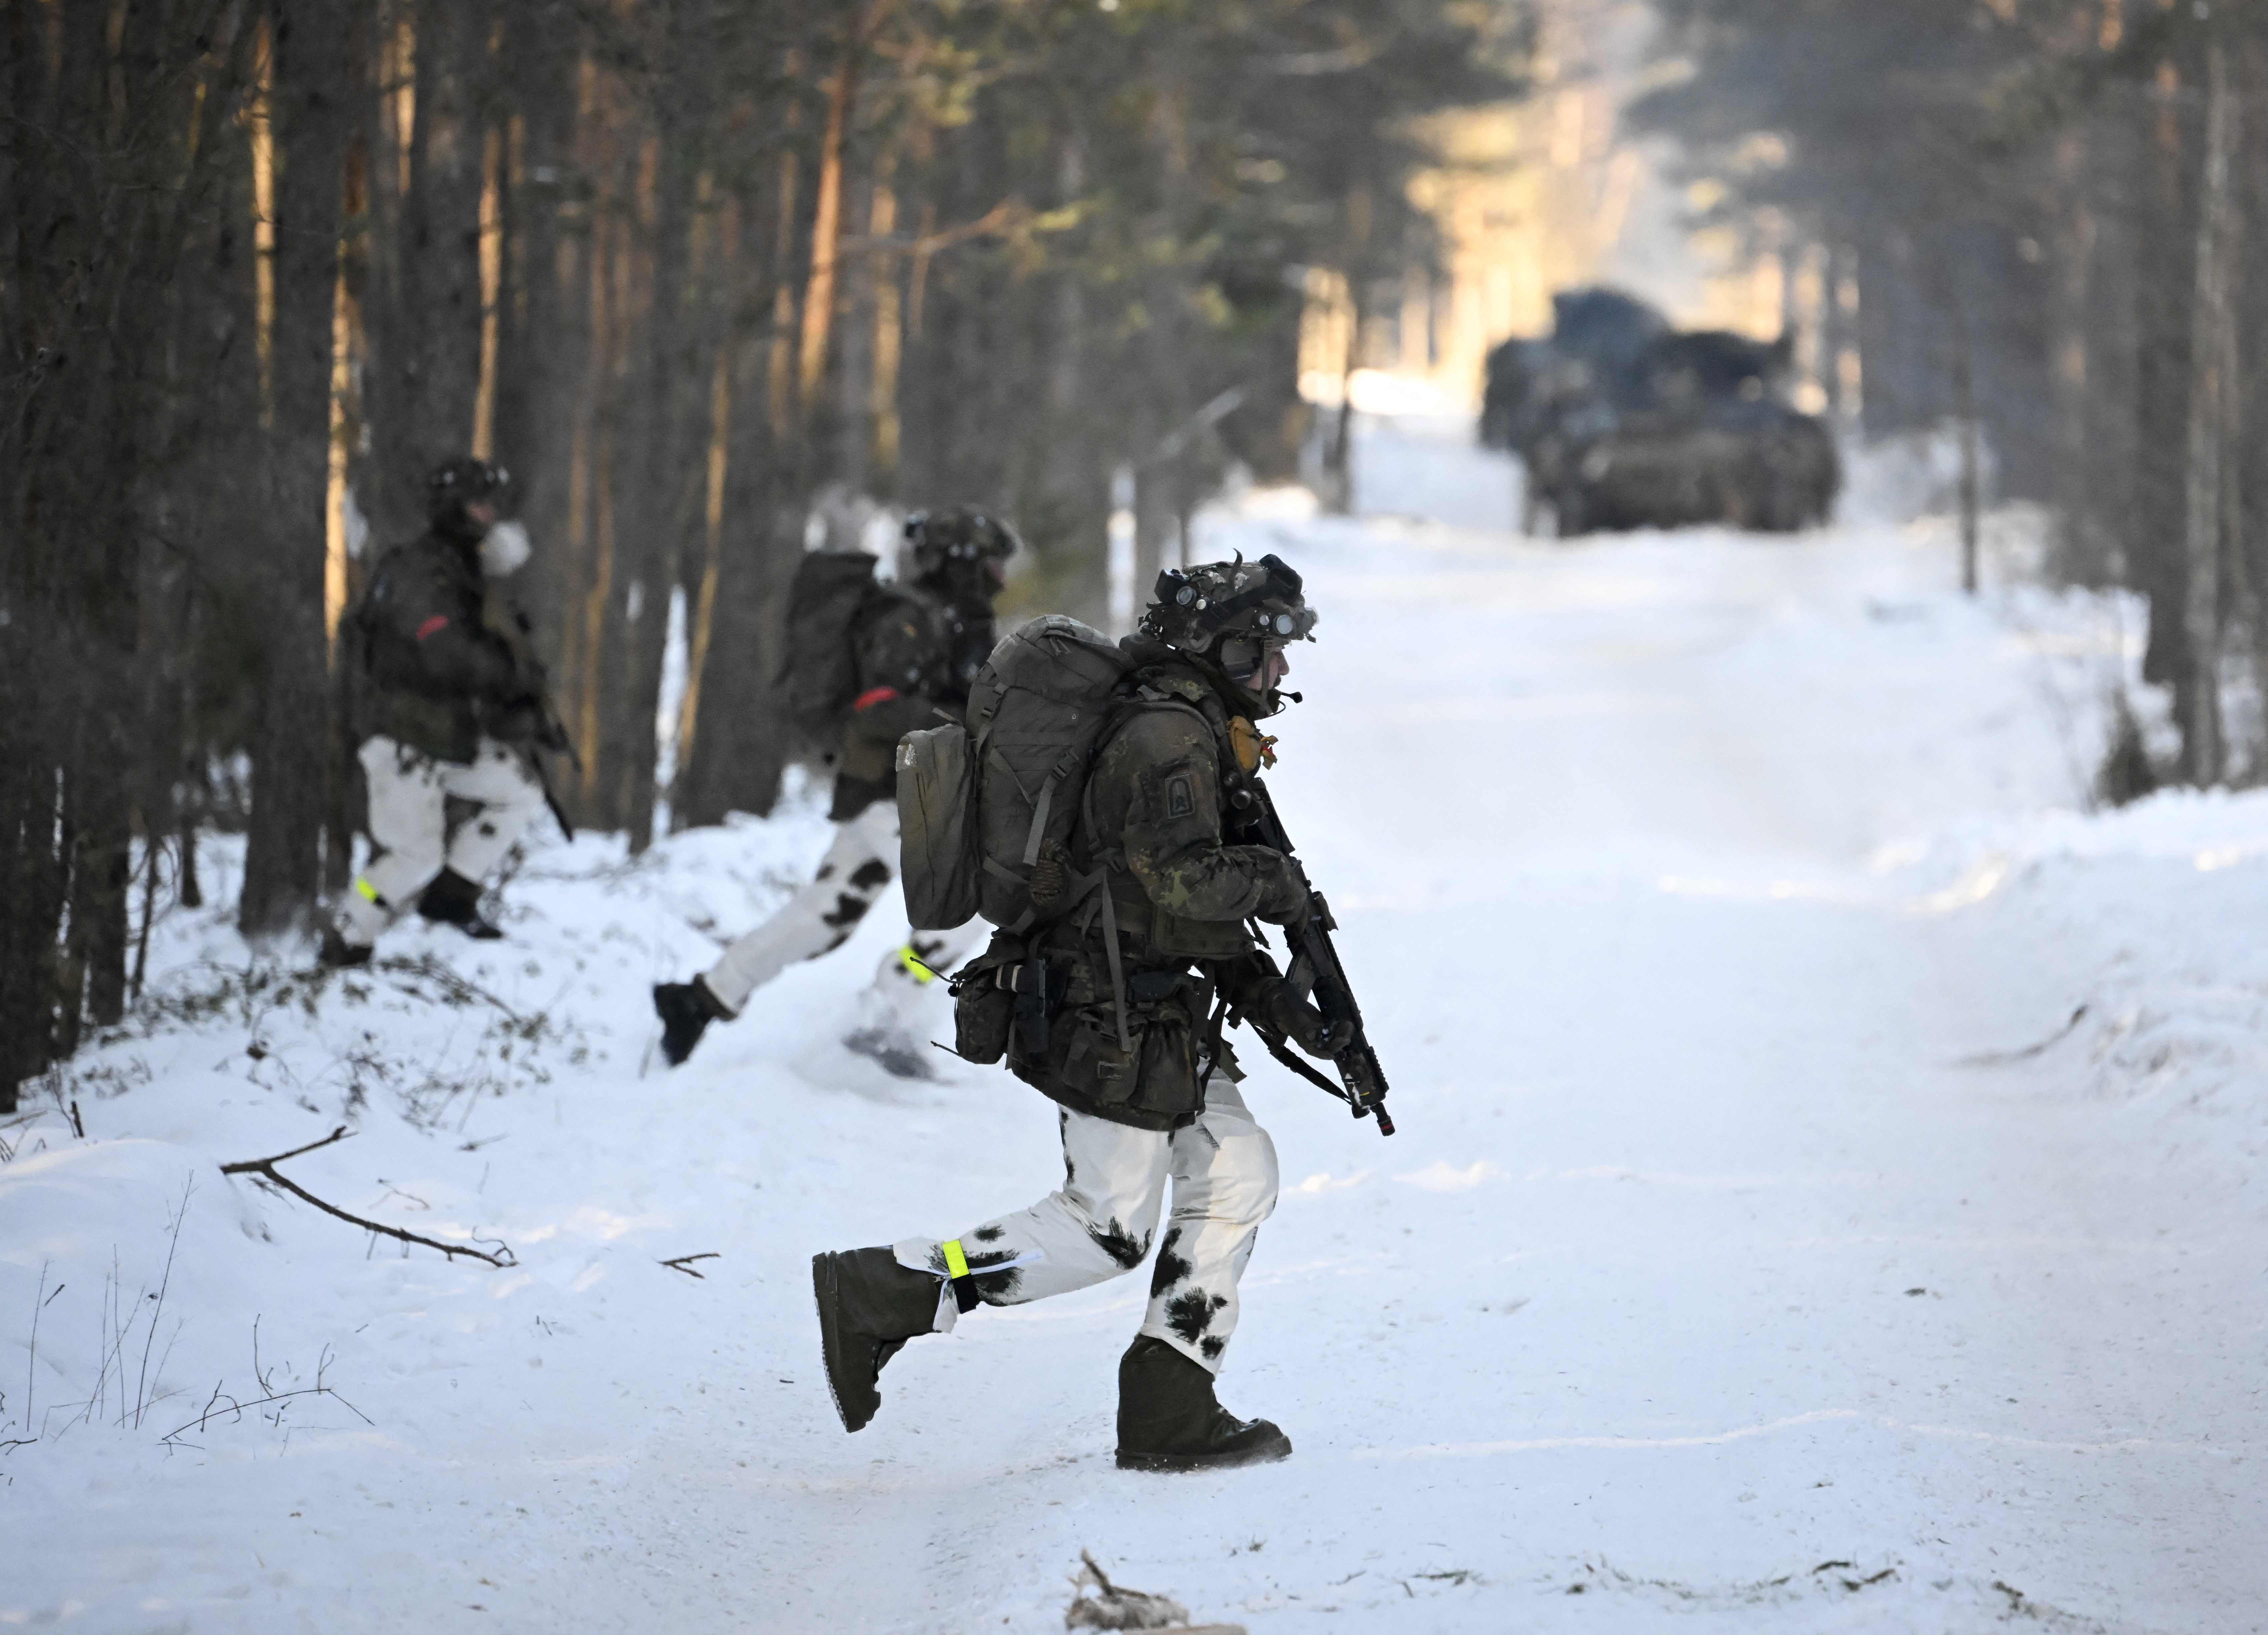 Soldiers of the German armed forces Bundeswehr who are part of the German contingent of NATO's Enhanced Forward Presence, attend exerice in a snow-covered forest on March 7, 2023 near Pabrade, Lithuania, during the visit of the German Defence Minister (unseen). (Photo by Tobias SCHWARZ / AFP)